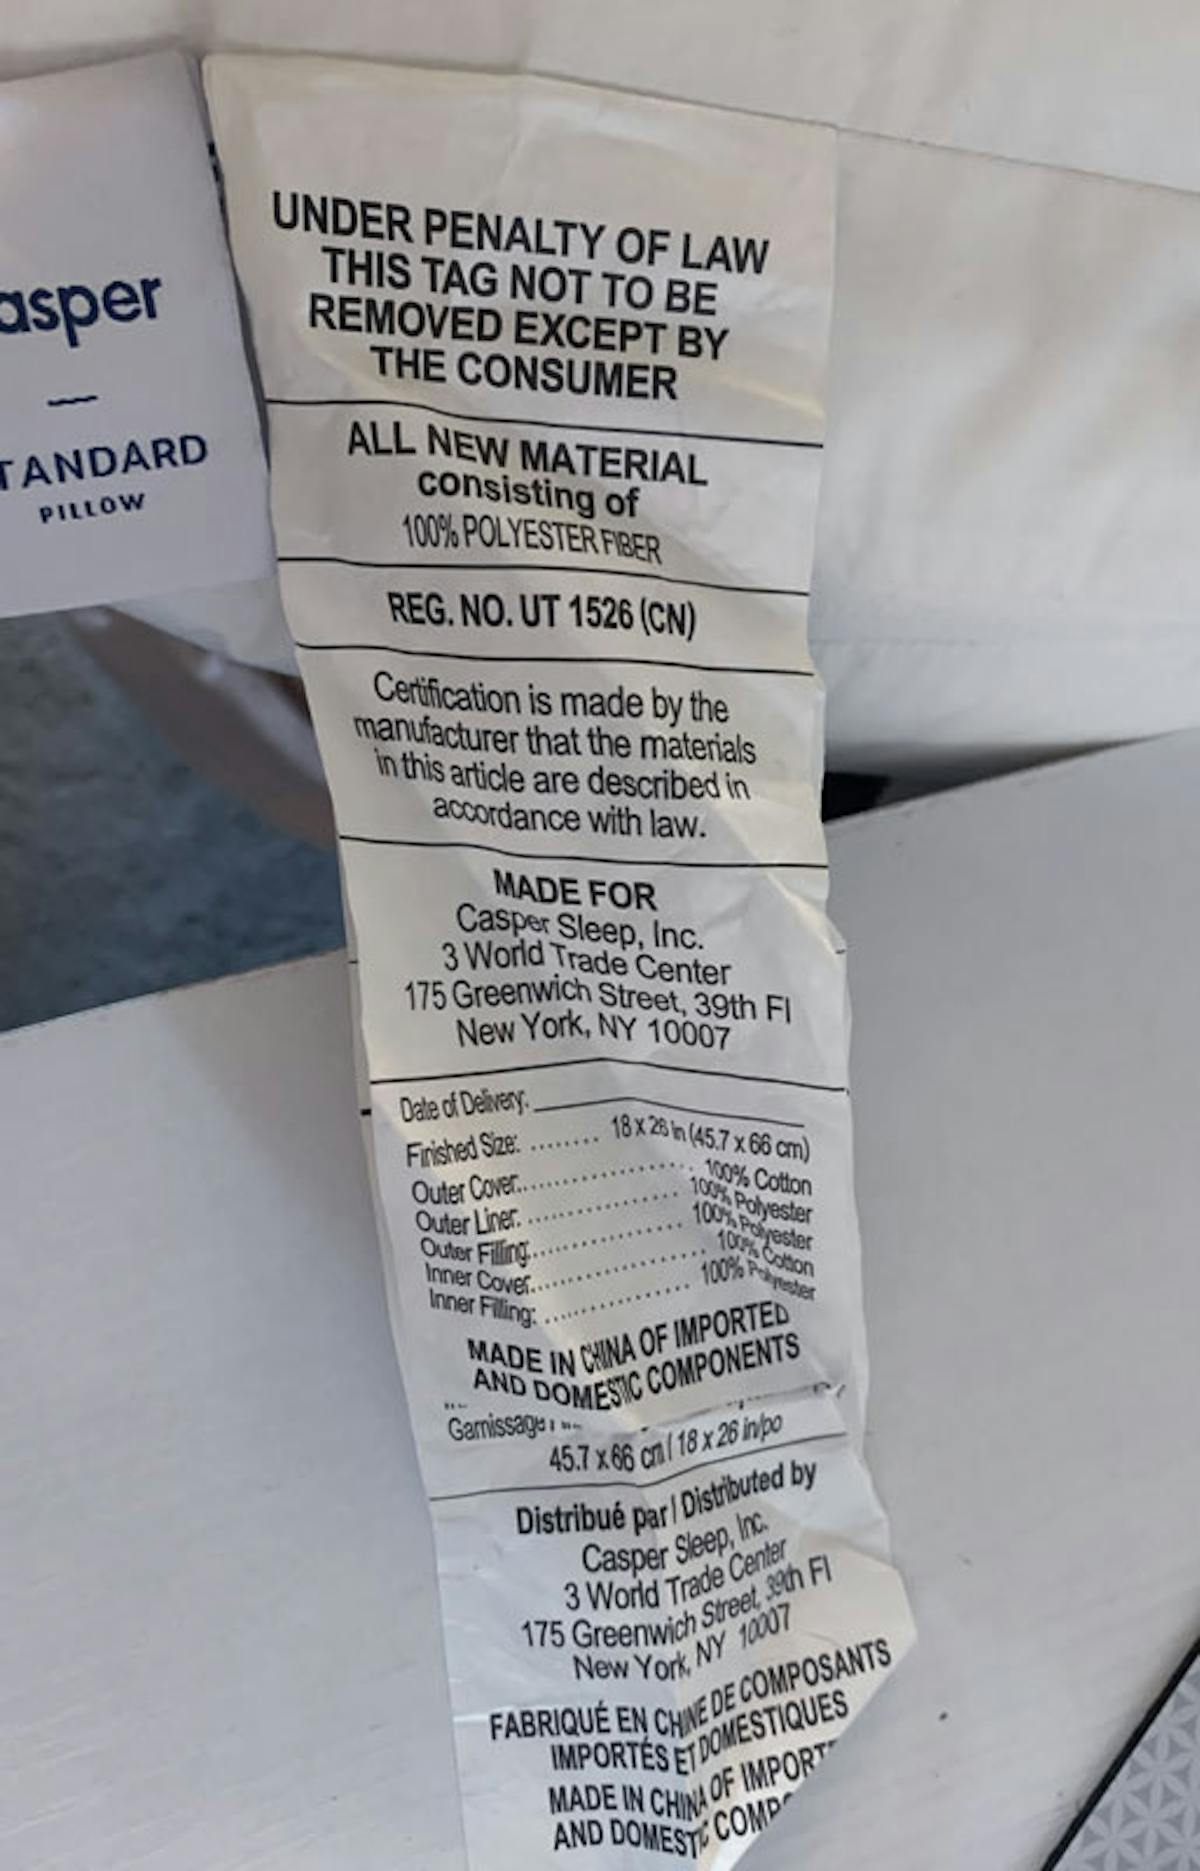 Why Do Pillows Have Tags? | Dutch Label Shop - NZ